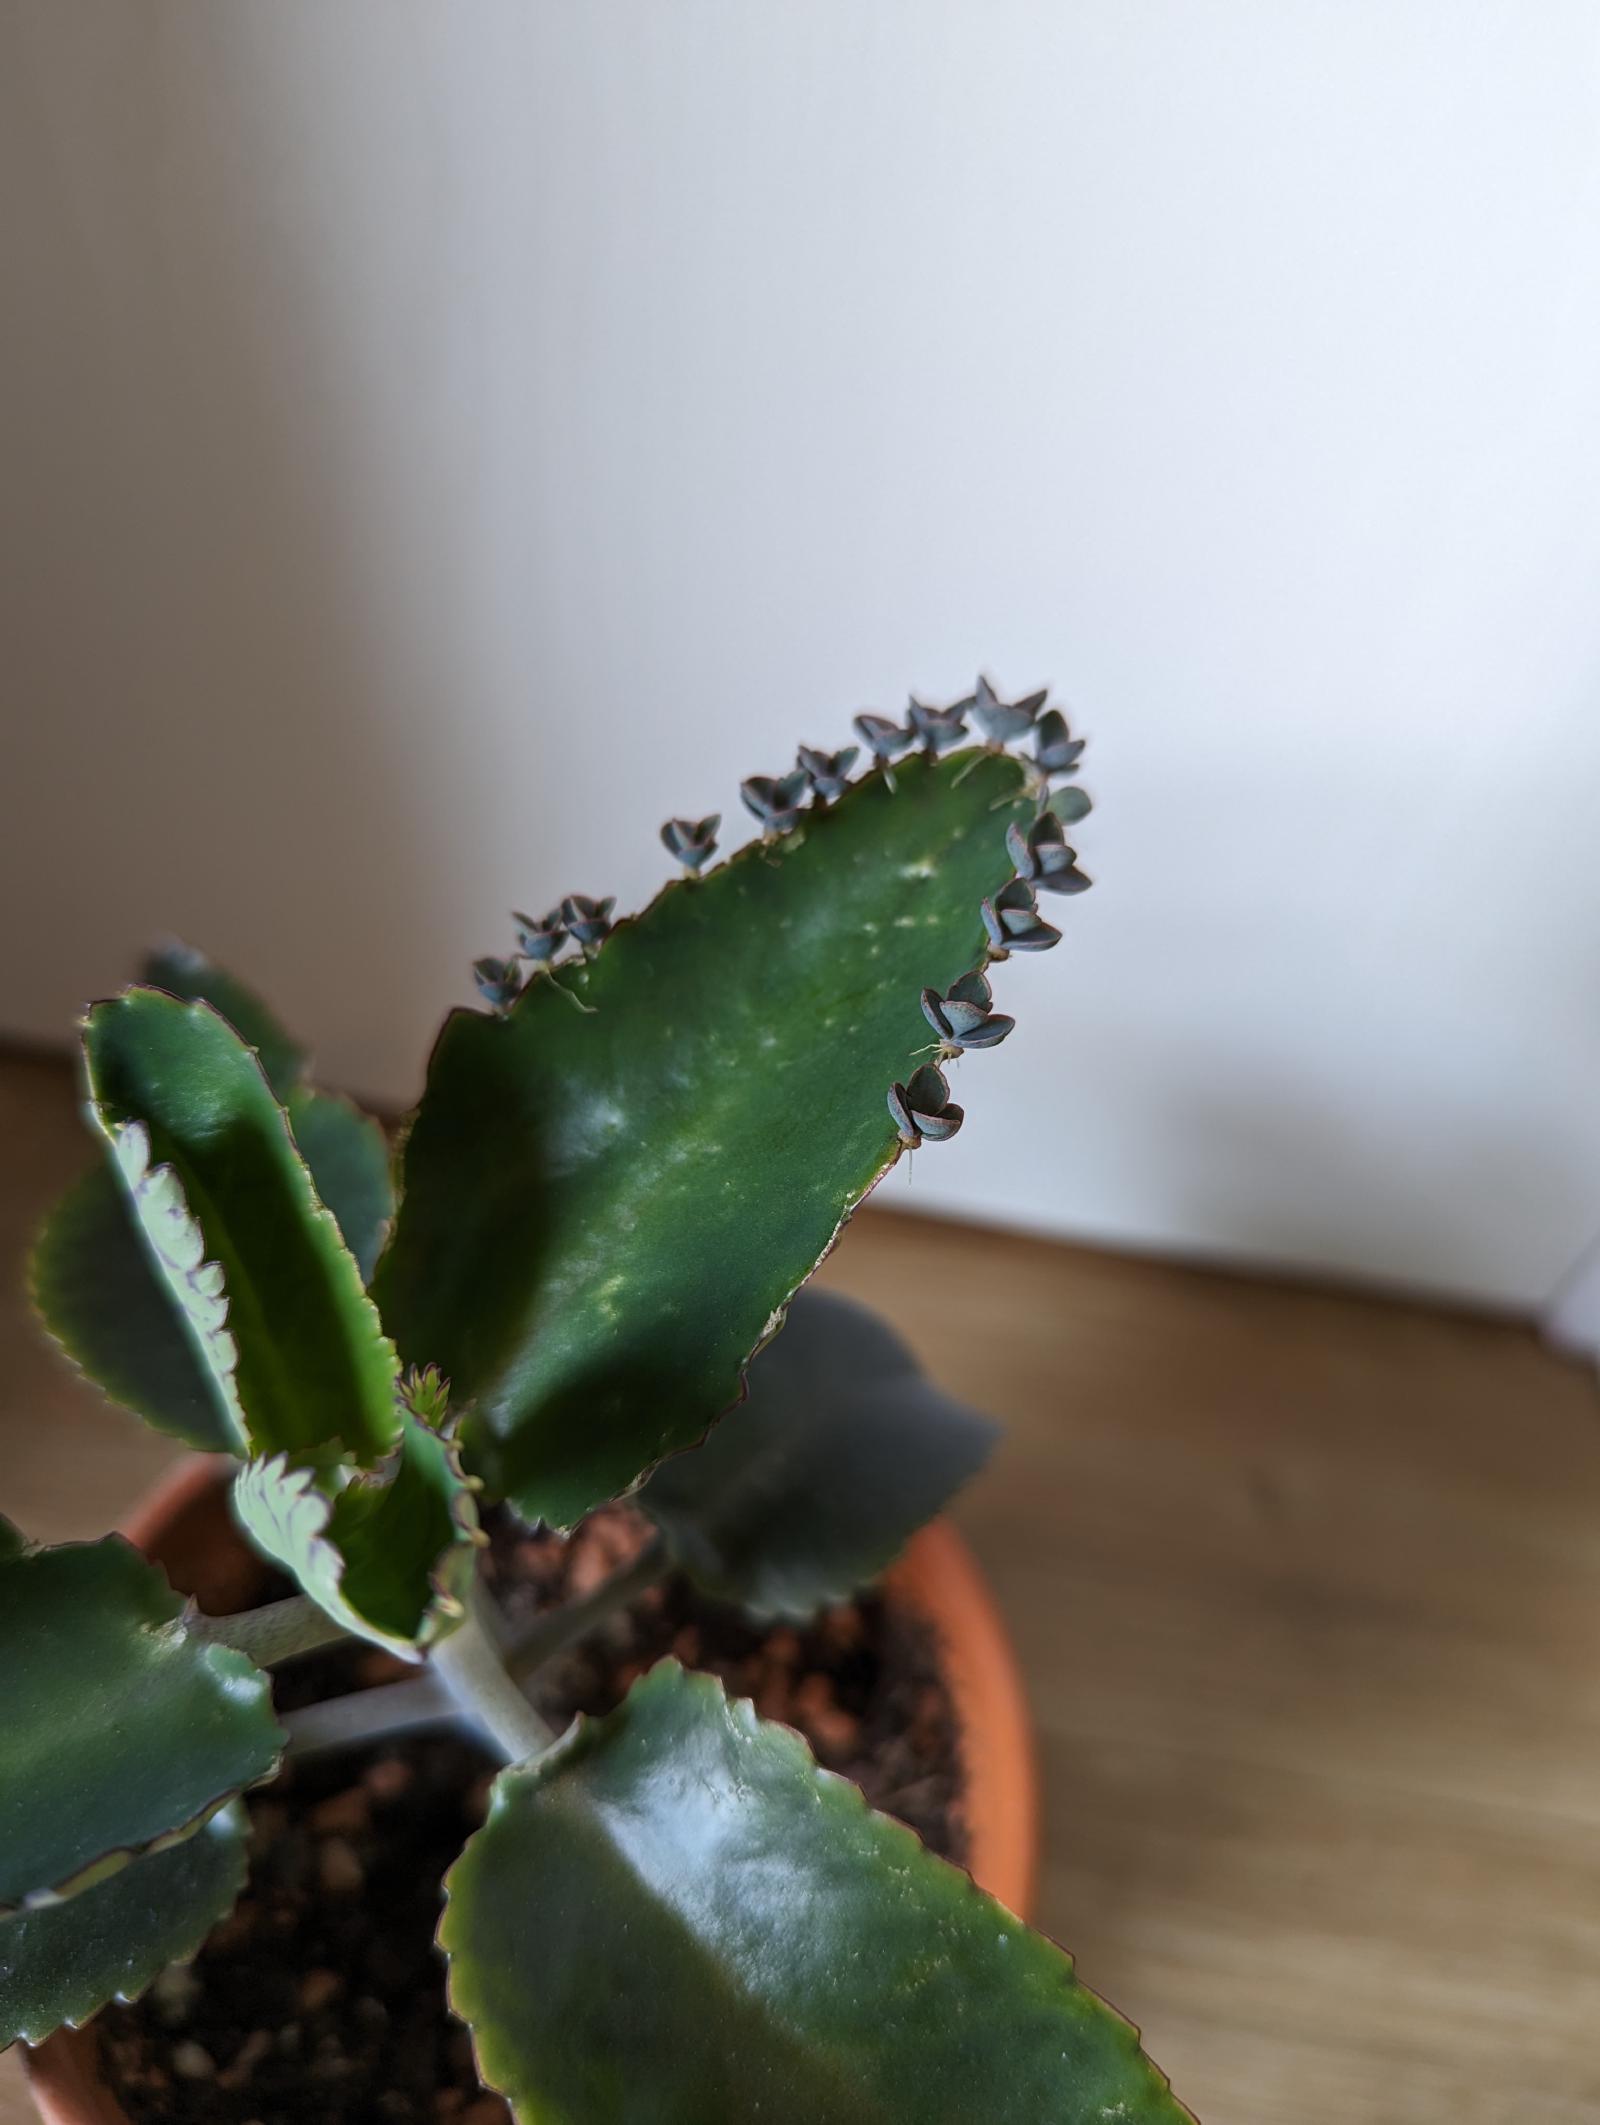 Picture of a mother of thousands plant in a terracotta pot. The plant has 4 sets of leaves and on the second set from the top, several plantlets are forming. The beginnings of some nodules are forming on the top set of leaves.